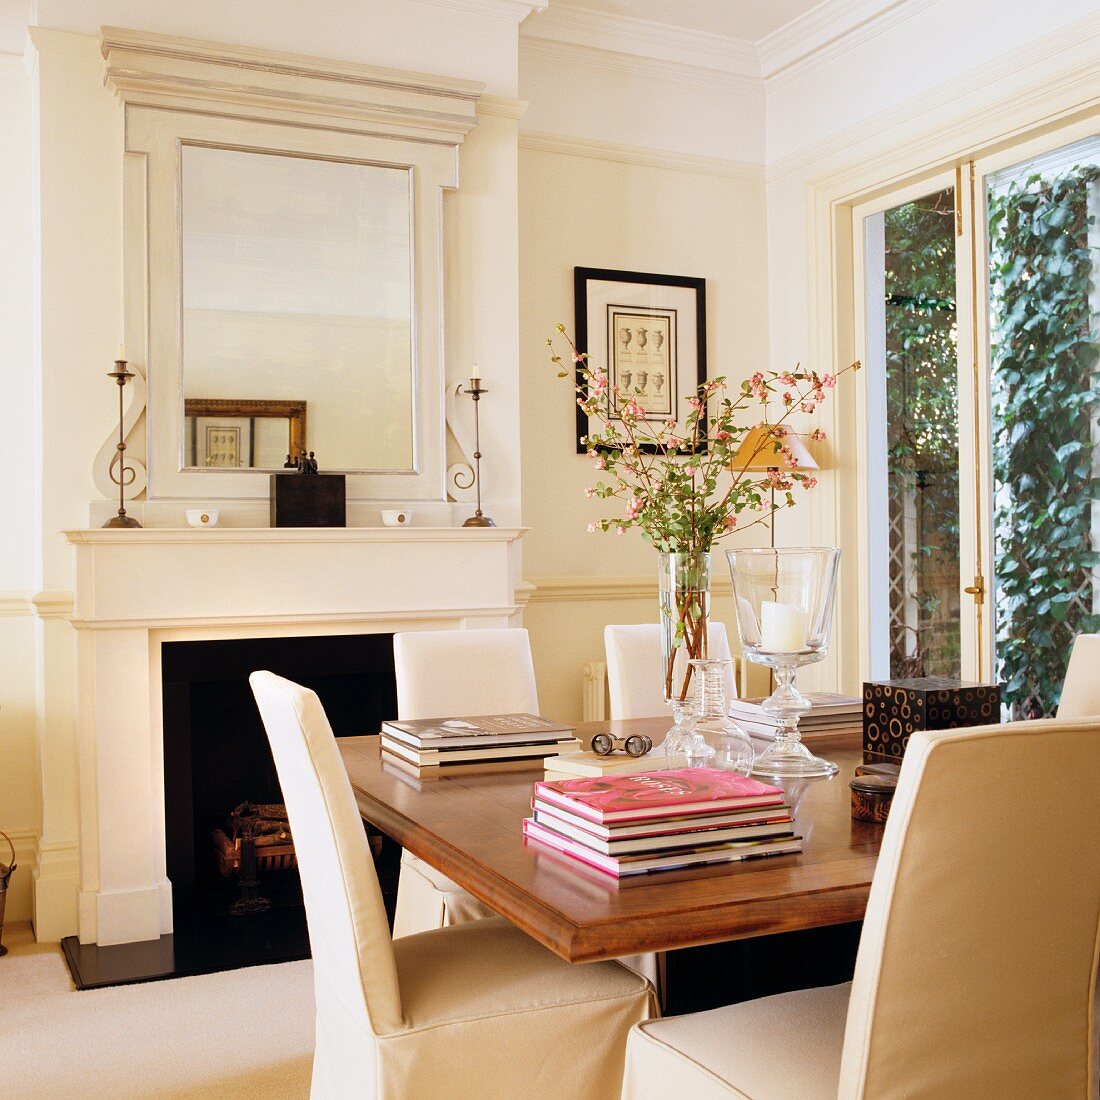 Chairs with pale loose covers and stacked books on wooden table in front of open fireplace in classical living room